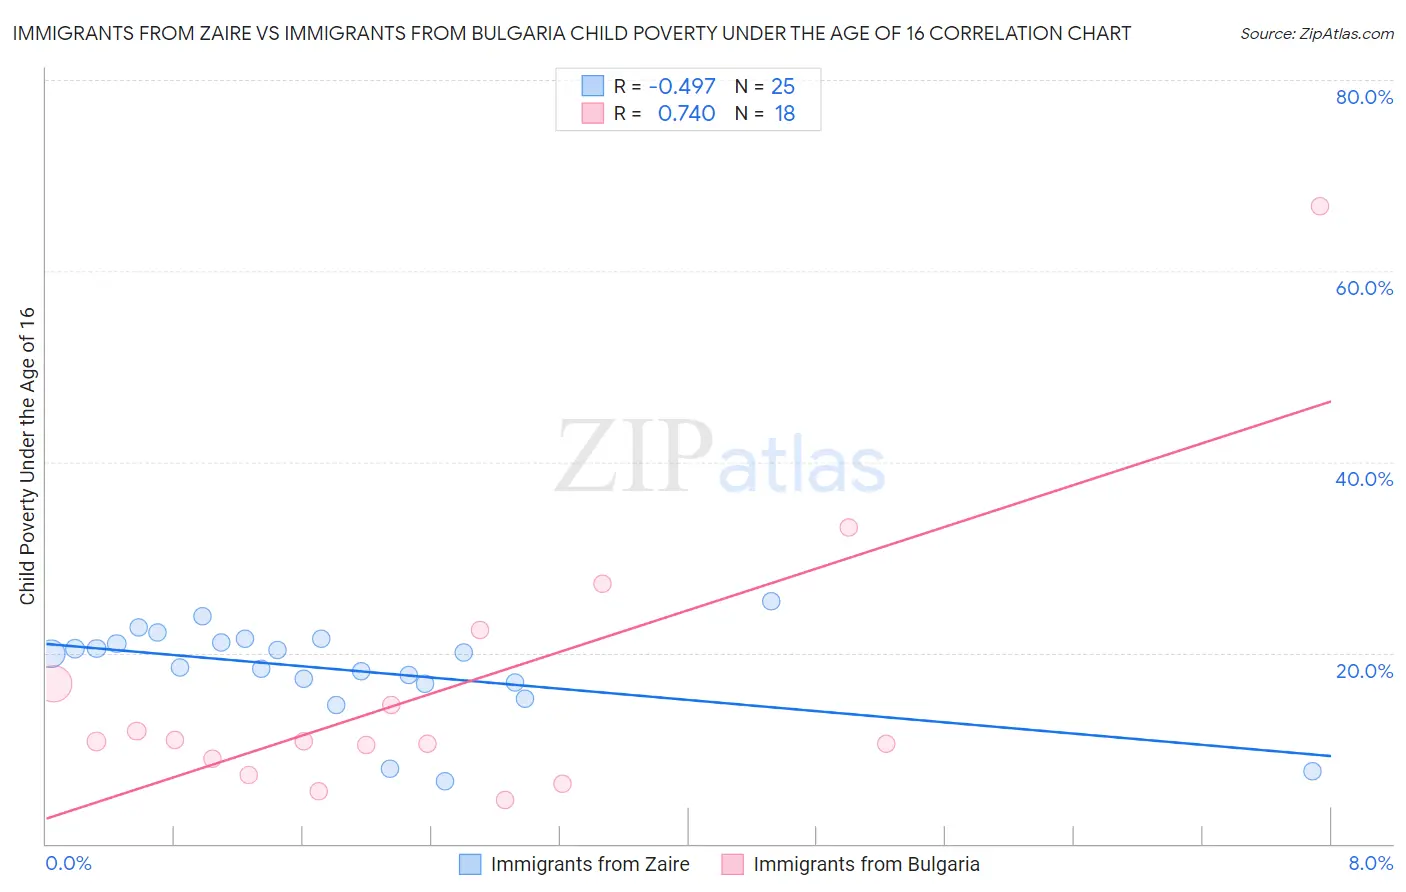 Immigrants from Zaire vs Immigrants from Bulgaria Child Poverty Under the Age of 16